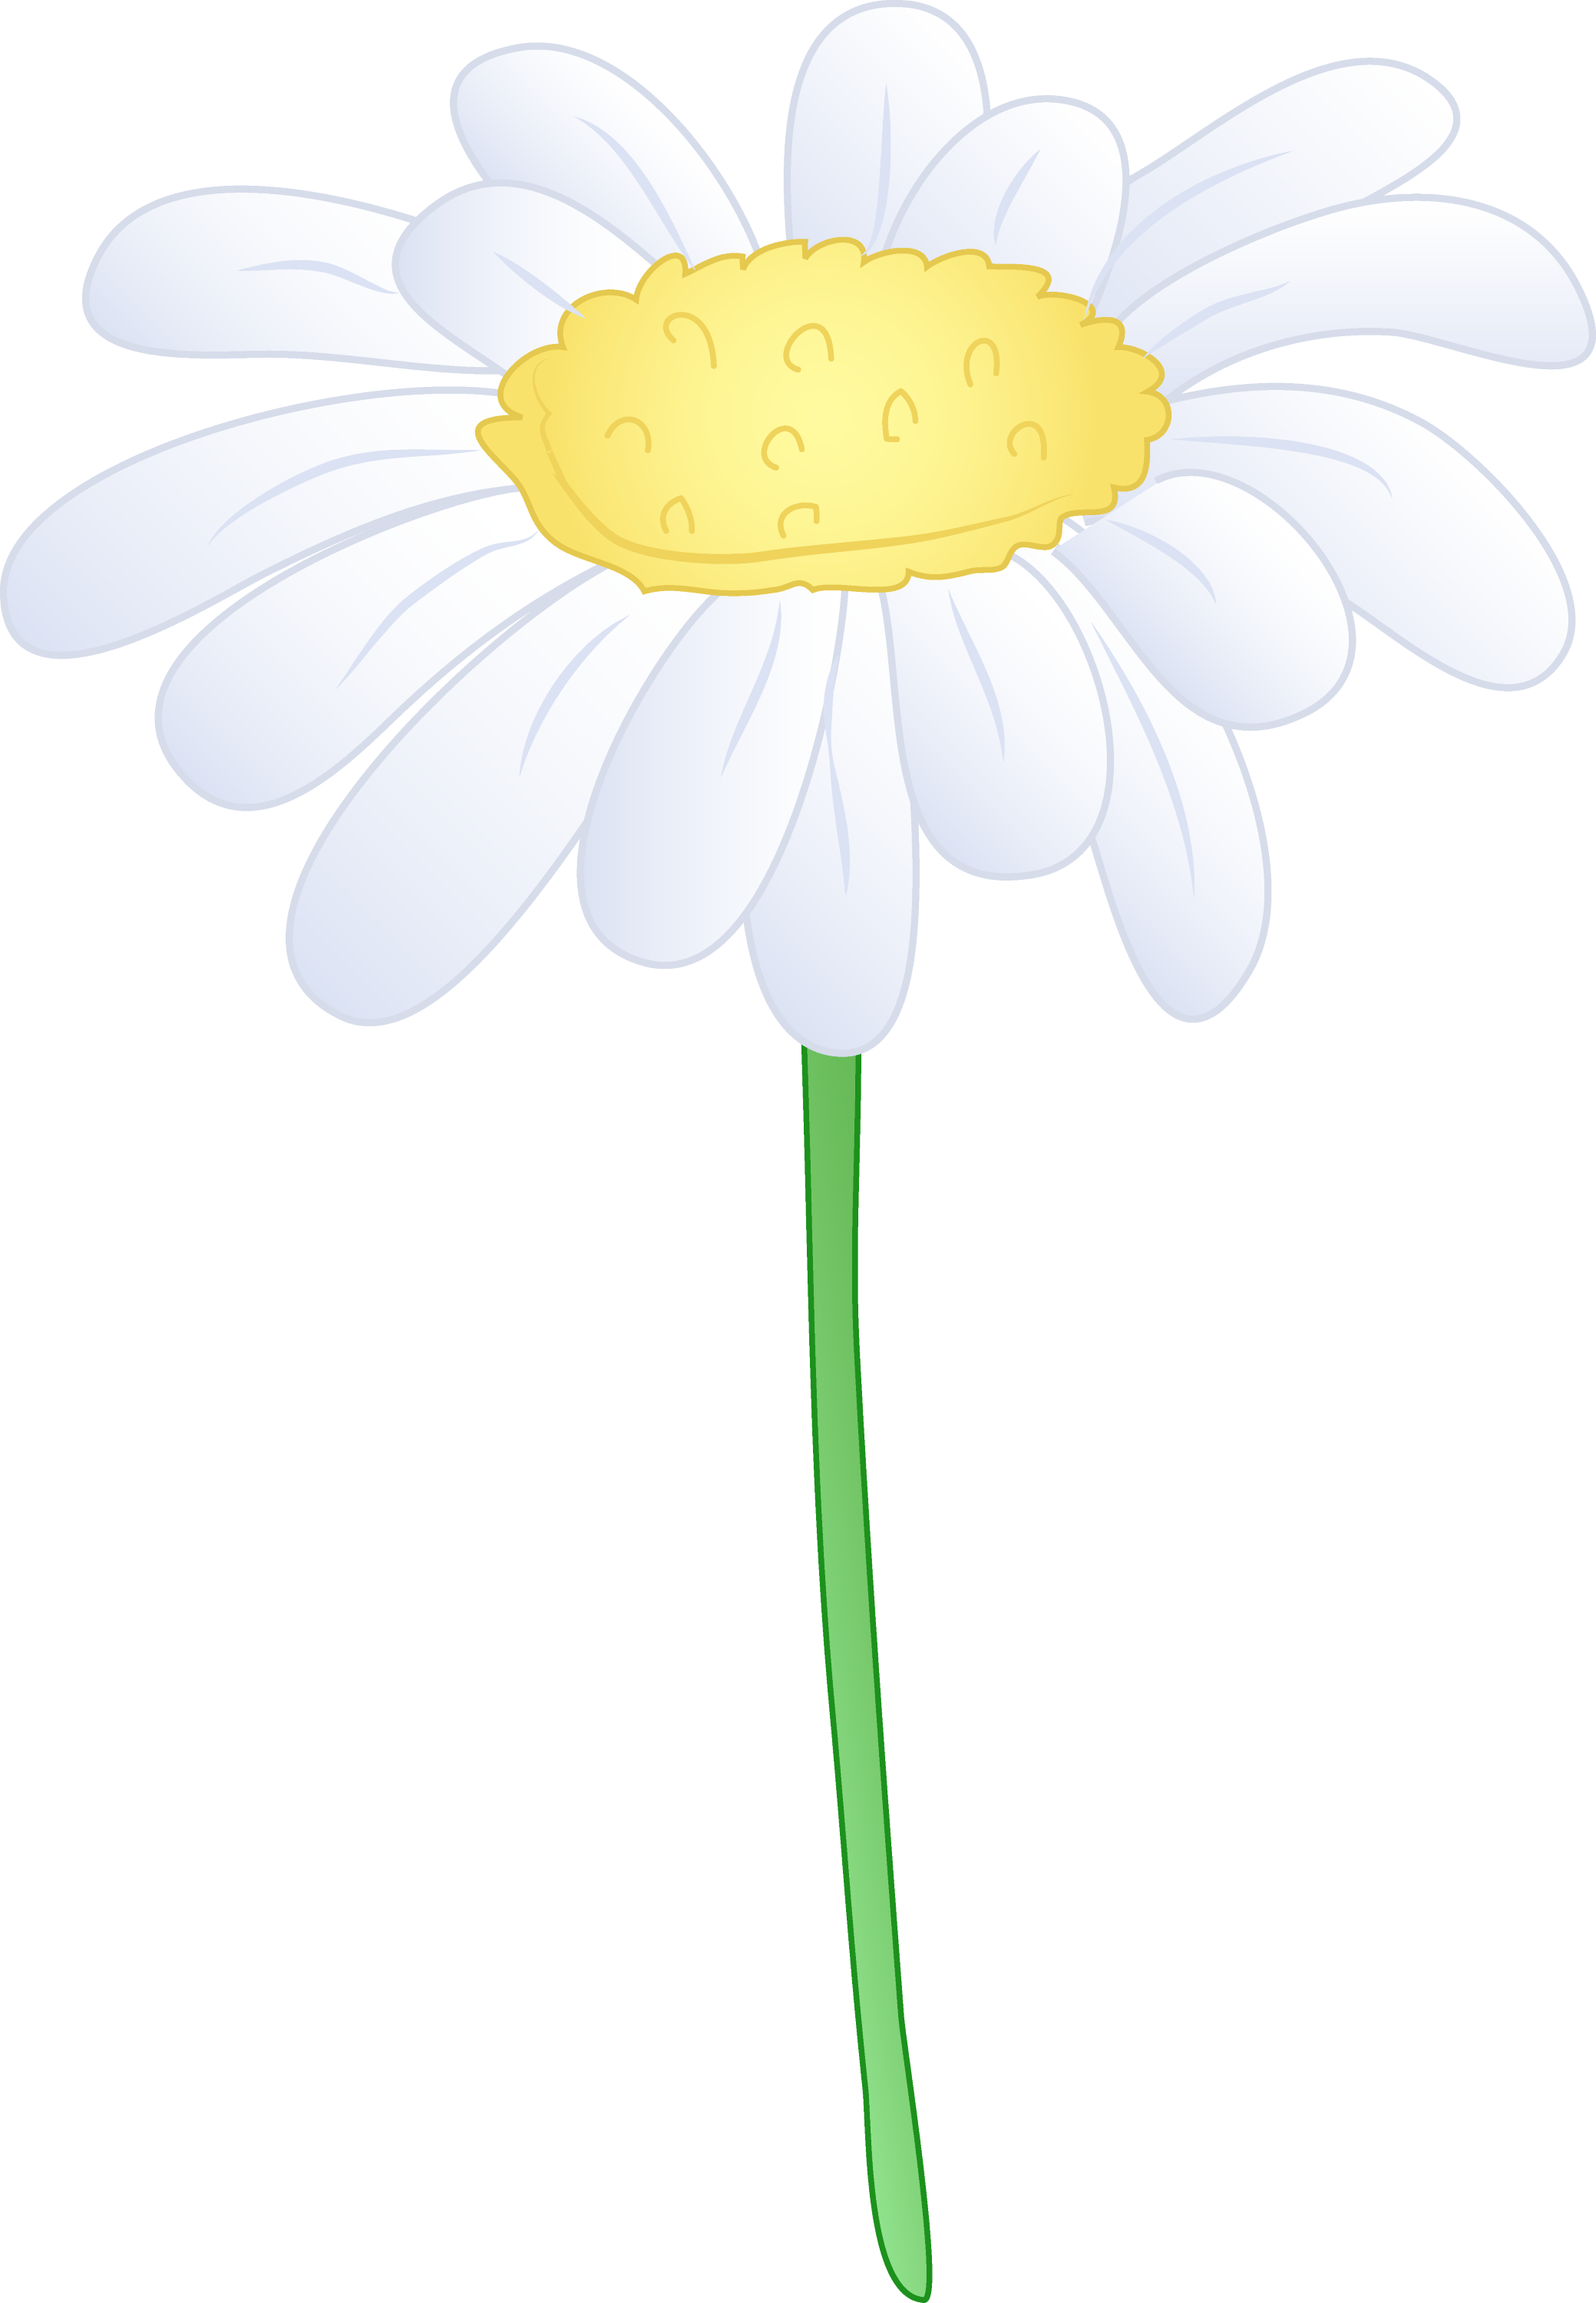 Flowers Daisy White Yellow Background PNG Image